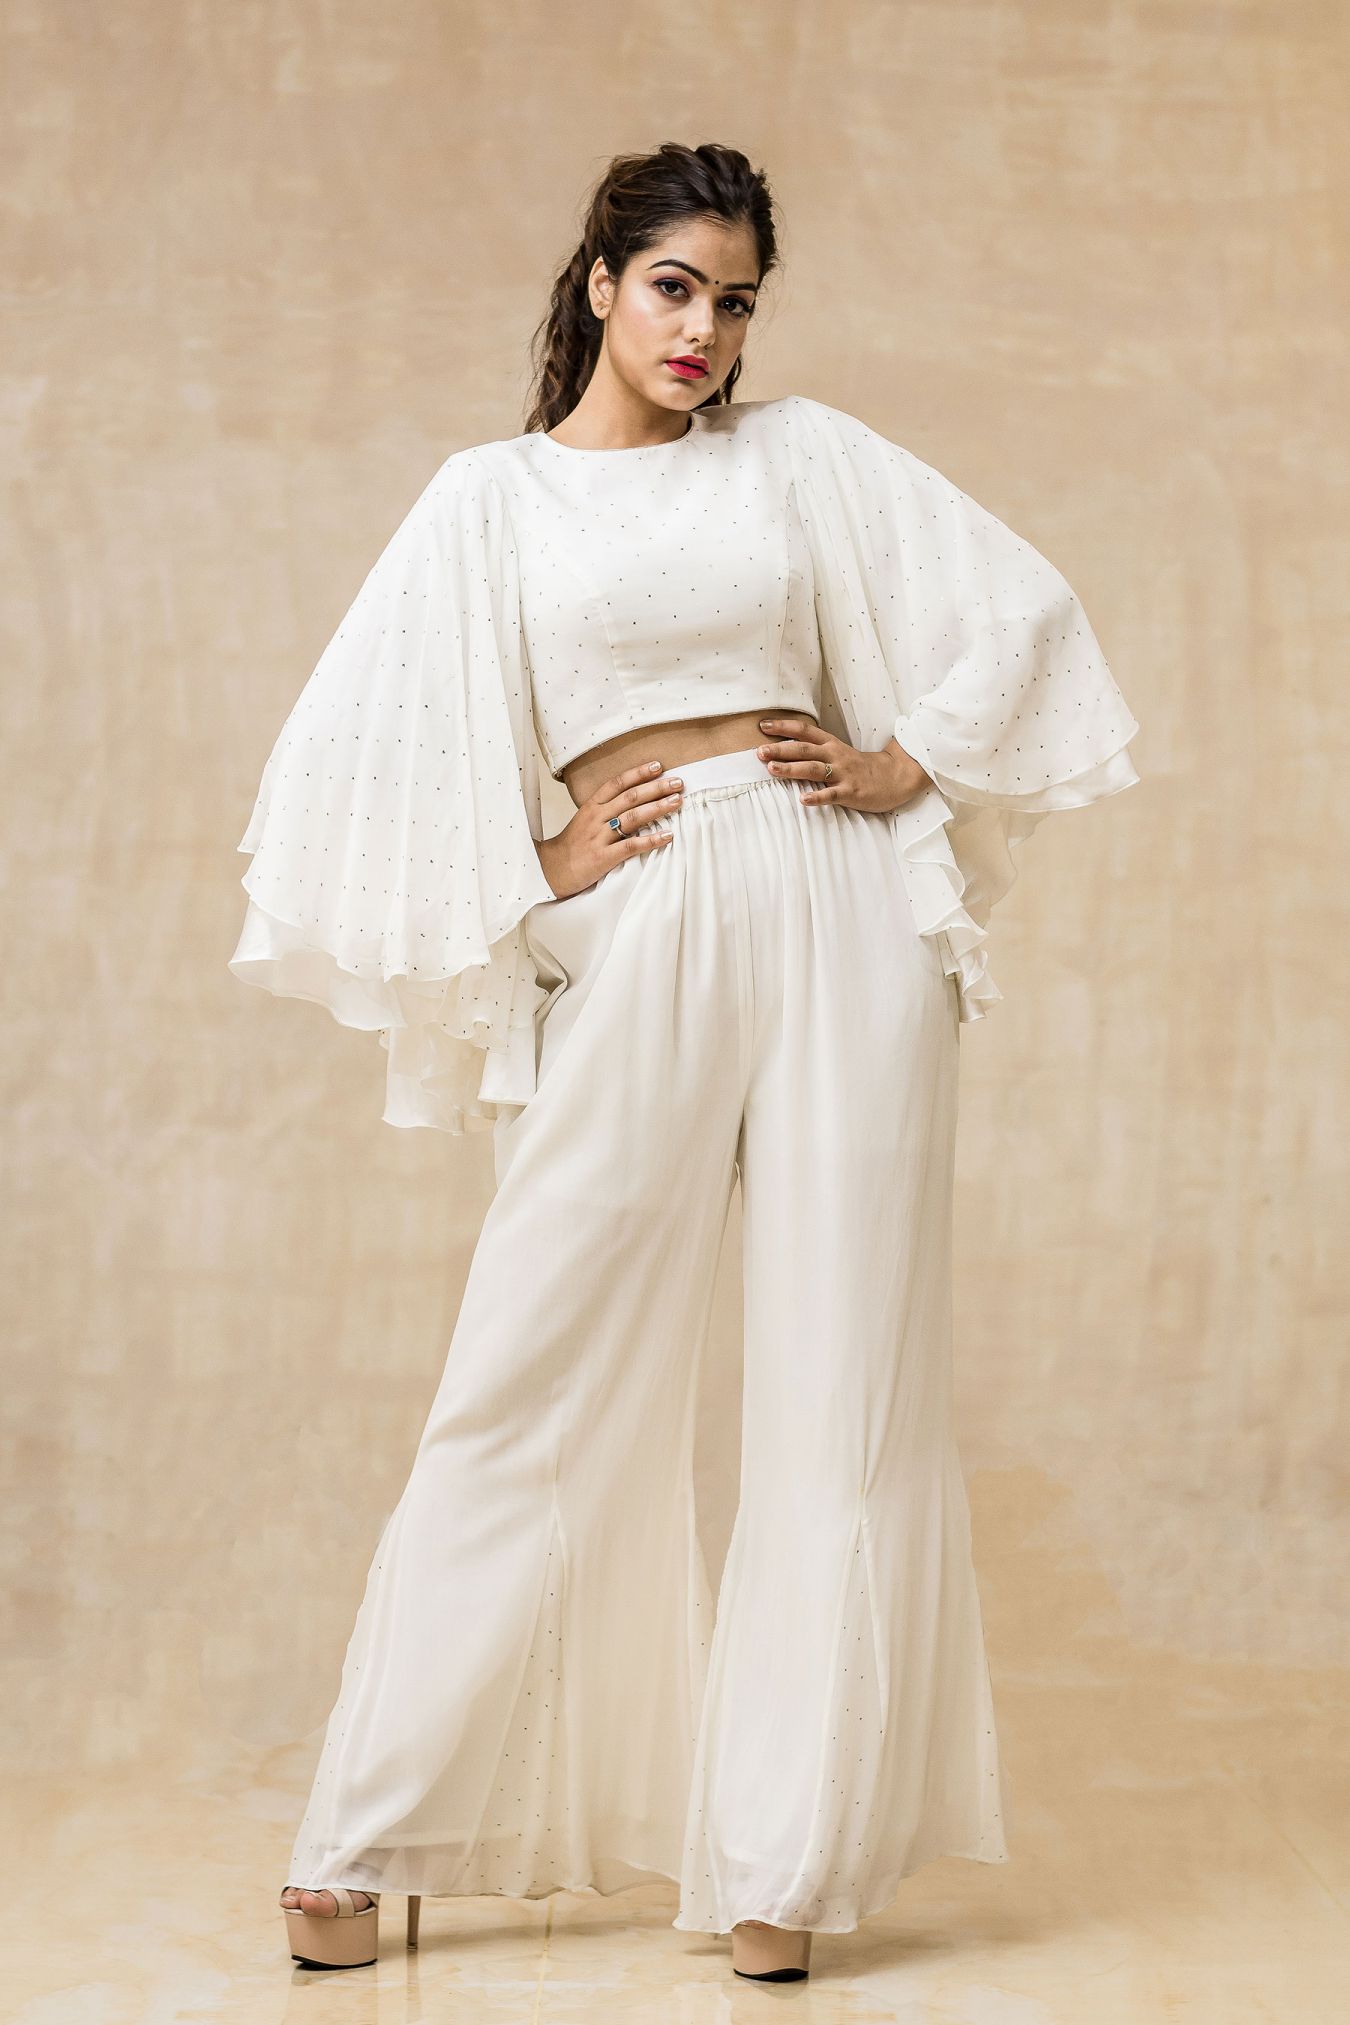 Flamboyant Circular Sleeved Georgette Top with Inticrate Mukaish work in Radiant White.